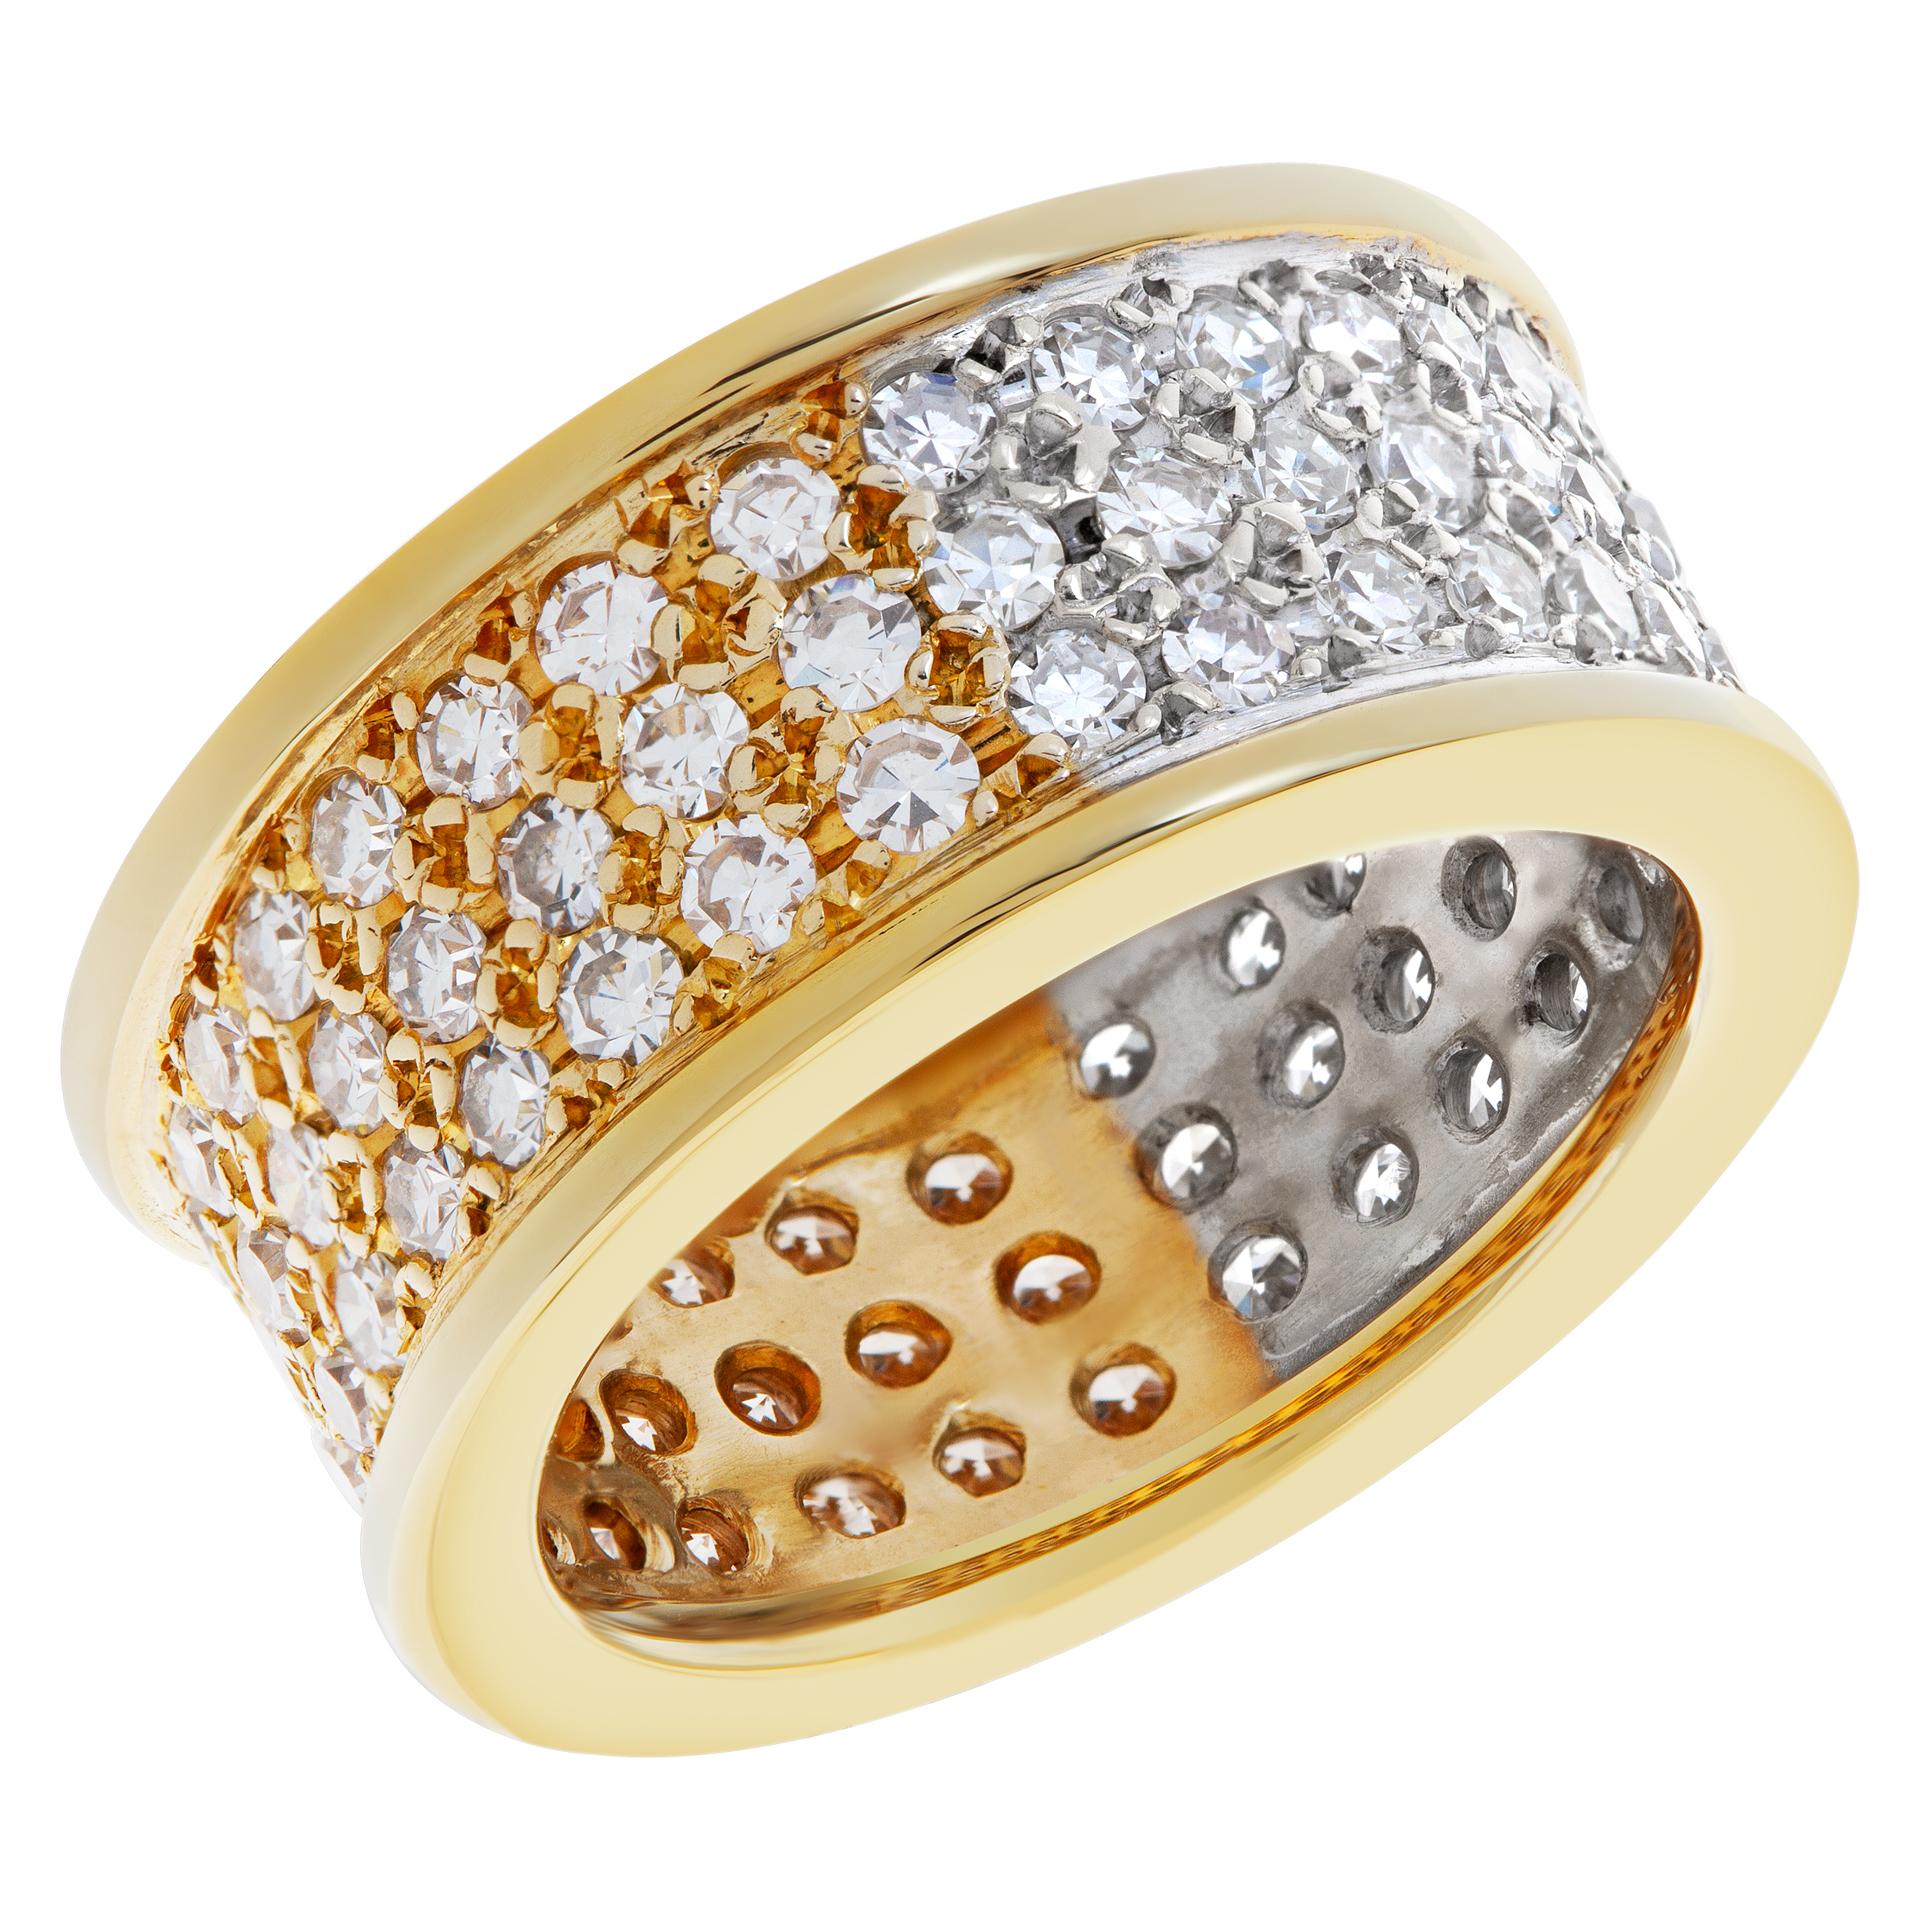 Wide Pave Diamond Band in 18k White and Yellow Gold In Excellent Condition For Sale In Surfside, FL